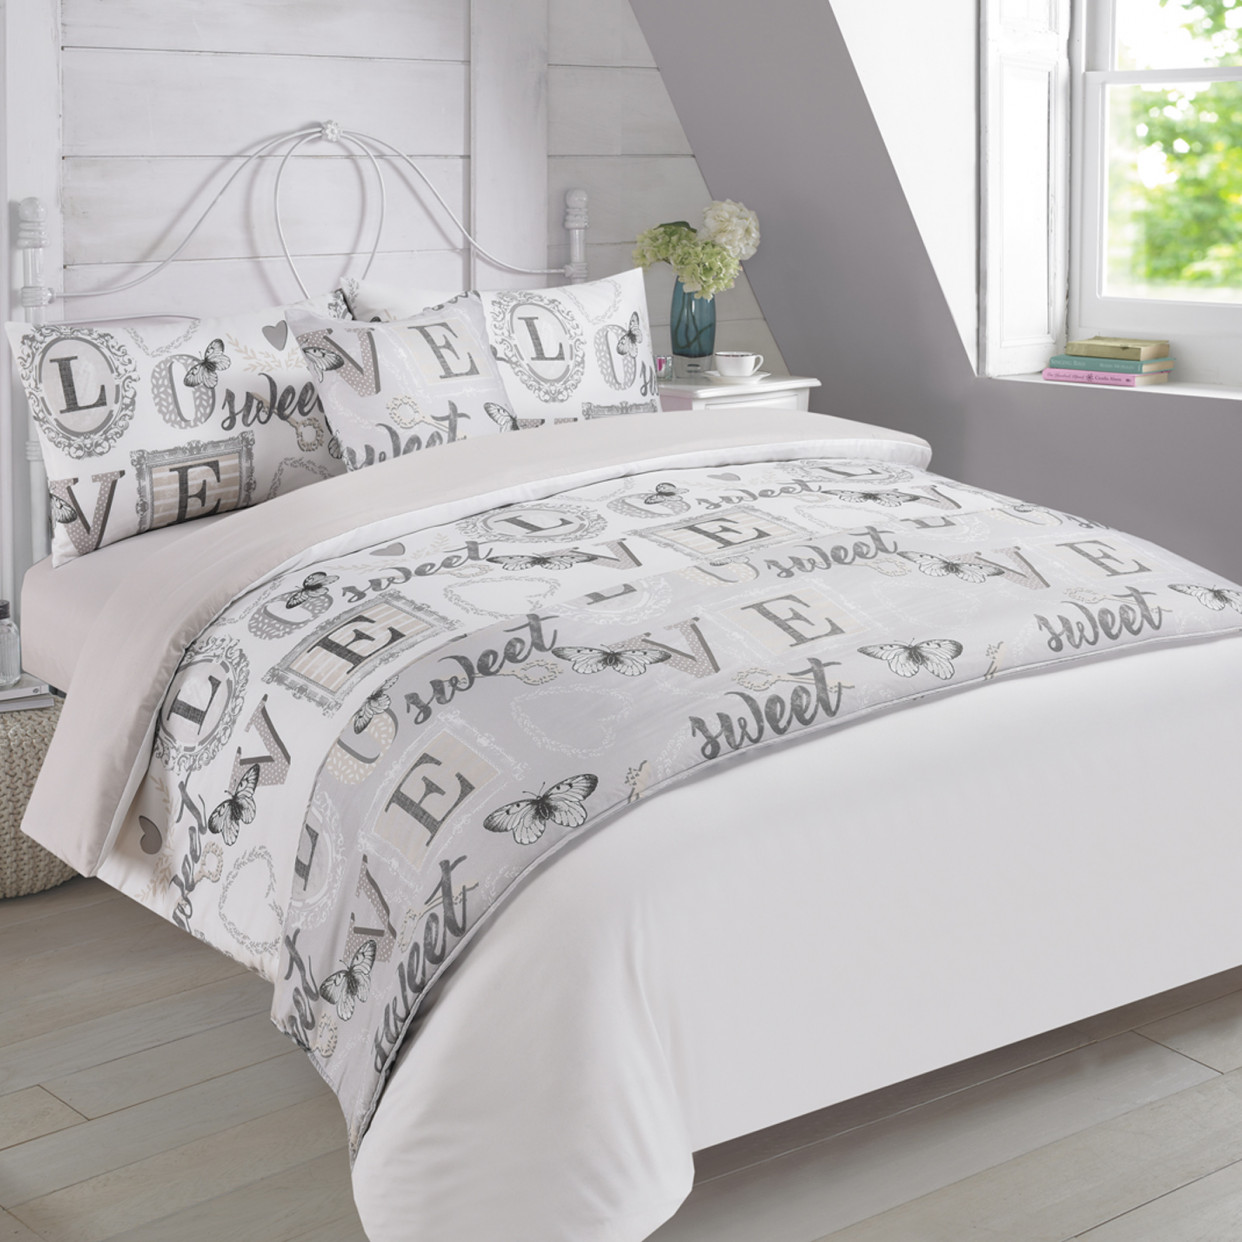 Dreamscene Complete Bed in a Bag Love Sweet Love Butterfly, Grey - Superking>